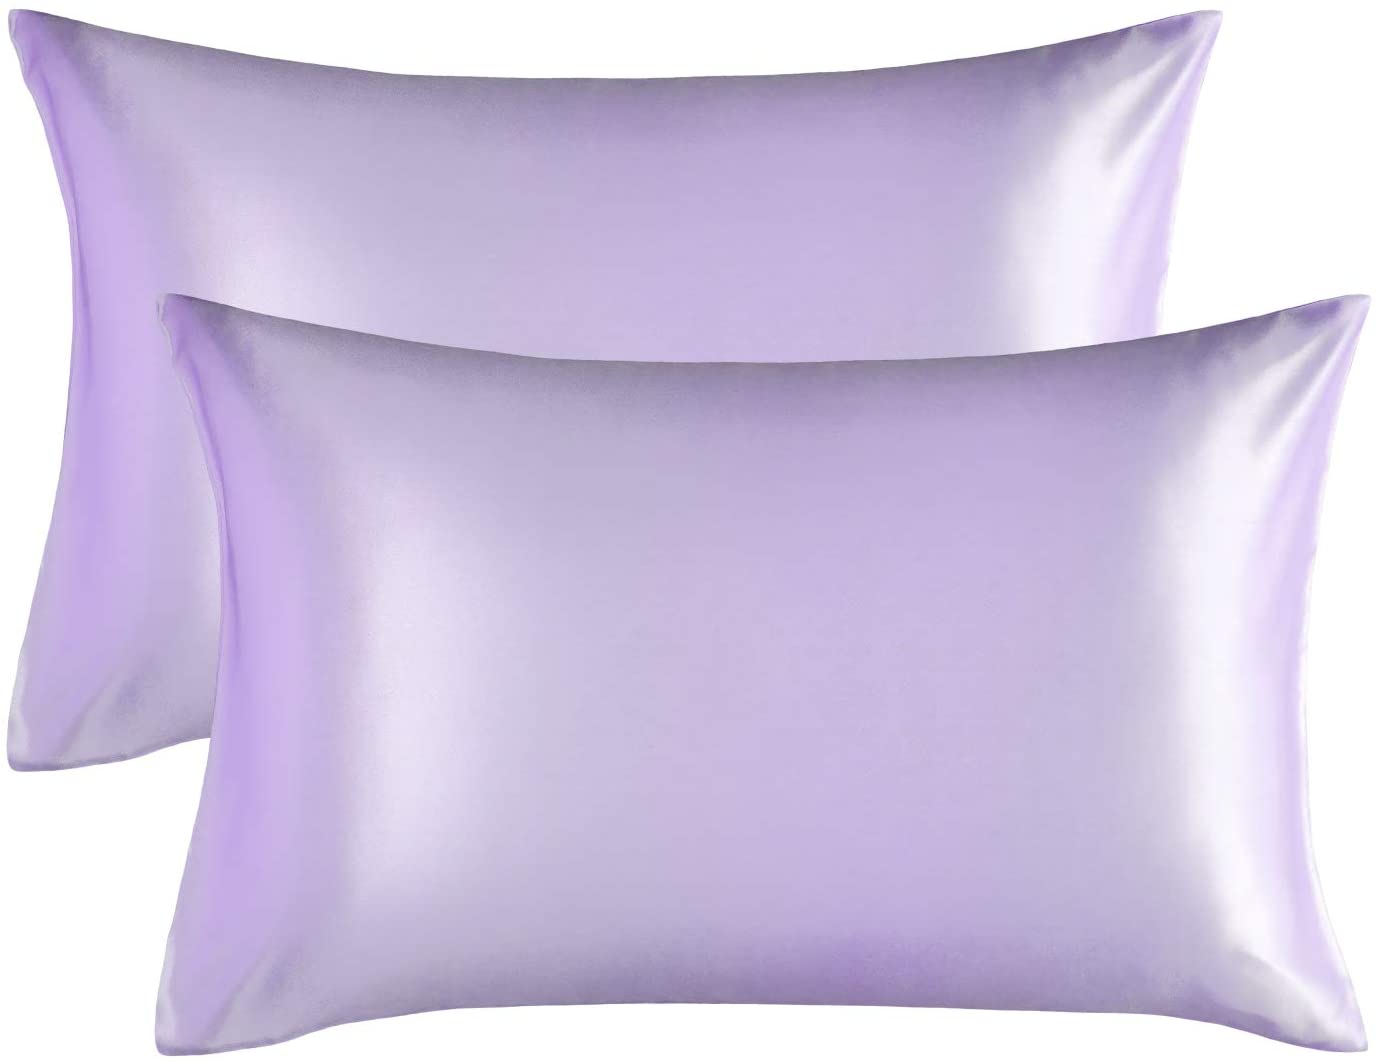 Muama Satin Silk Pillowcase 2 Pack for Hair and Skin with 